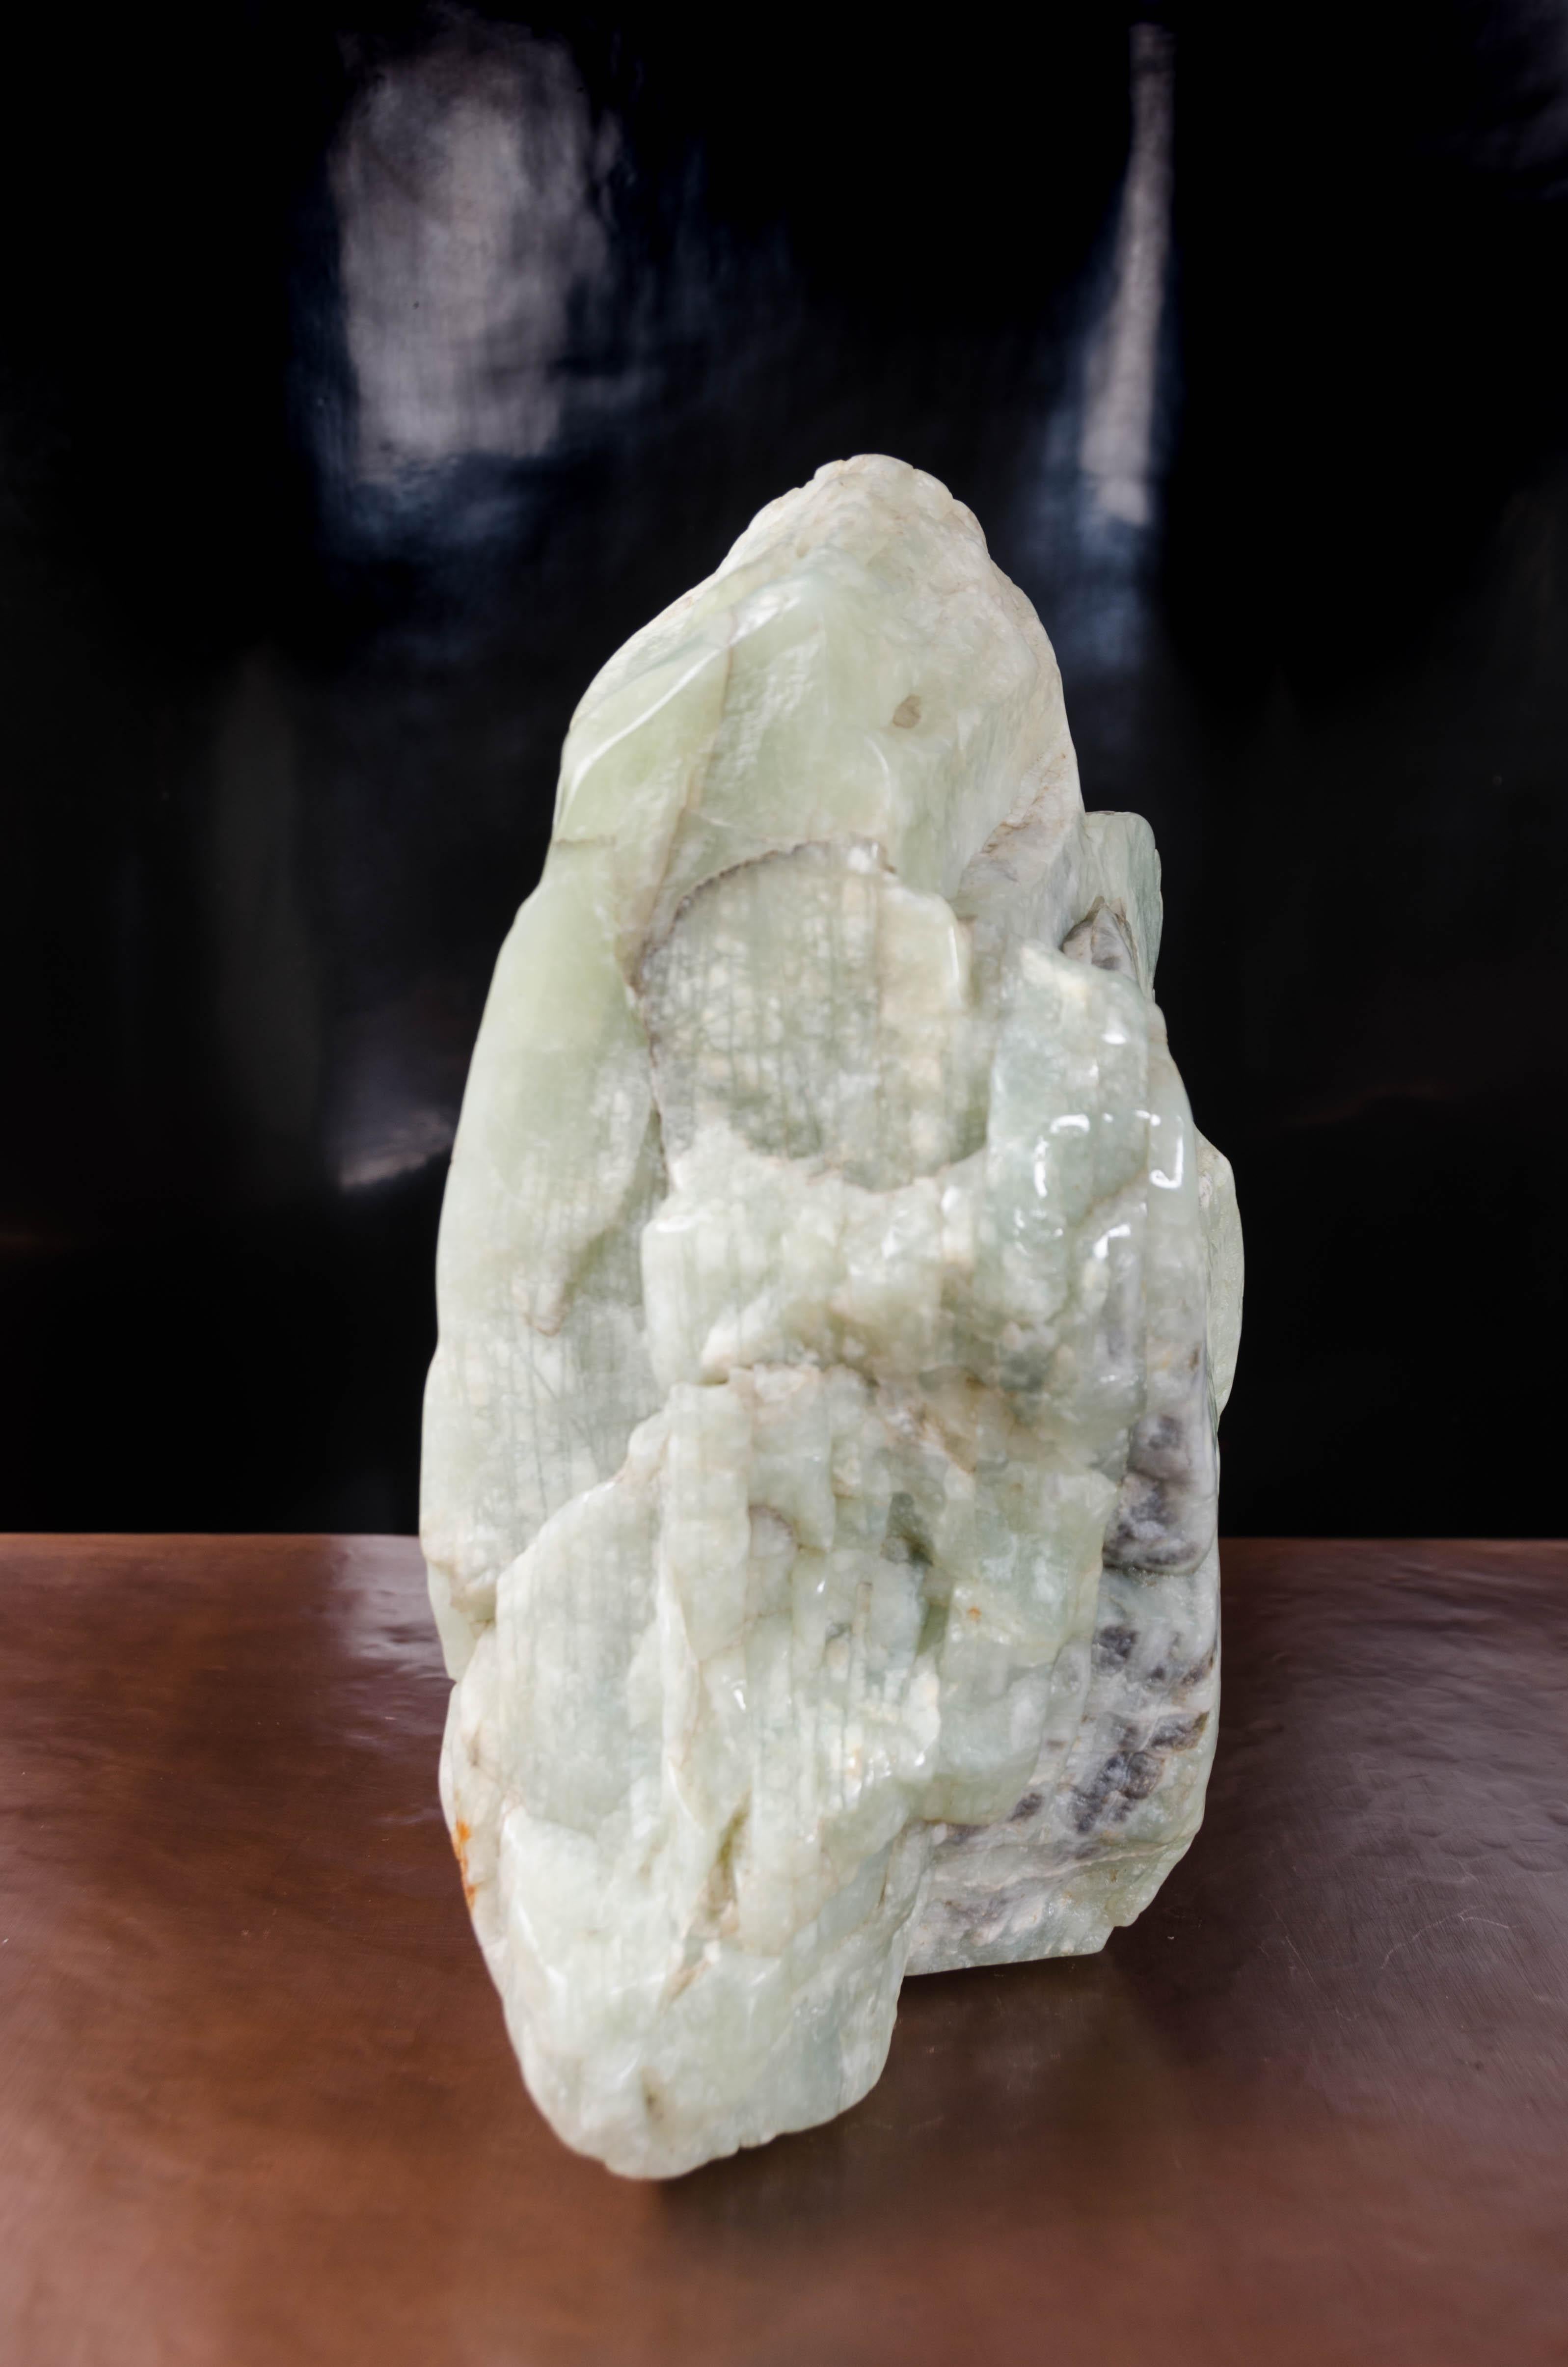 Scholar rock
Nephrite jade
Hand carved
Limited edition
Each piece is individually crafted and is unique. Jade color, size, shape and inclusions all vary.

Known as the “Stone of Heaven,” Nephrite Jade is prized for both its aesthetic beauty